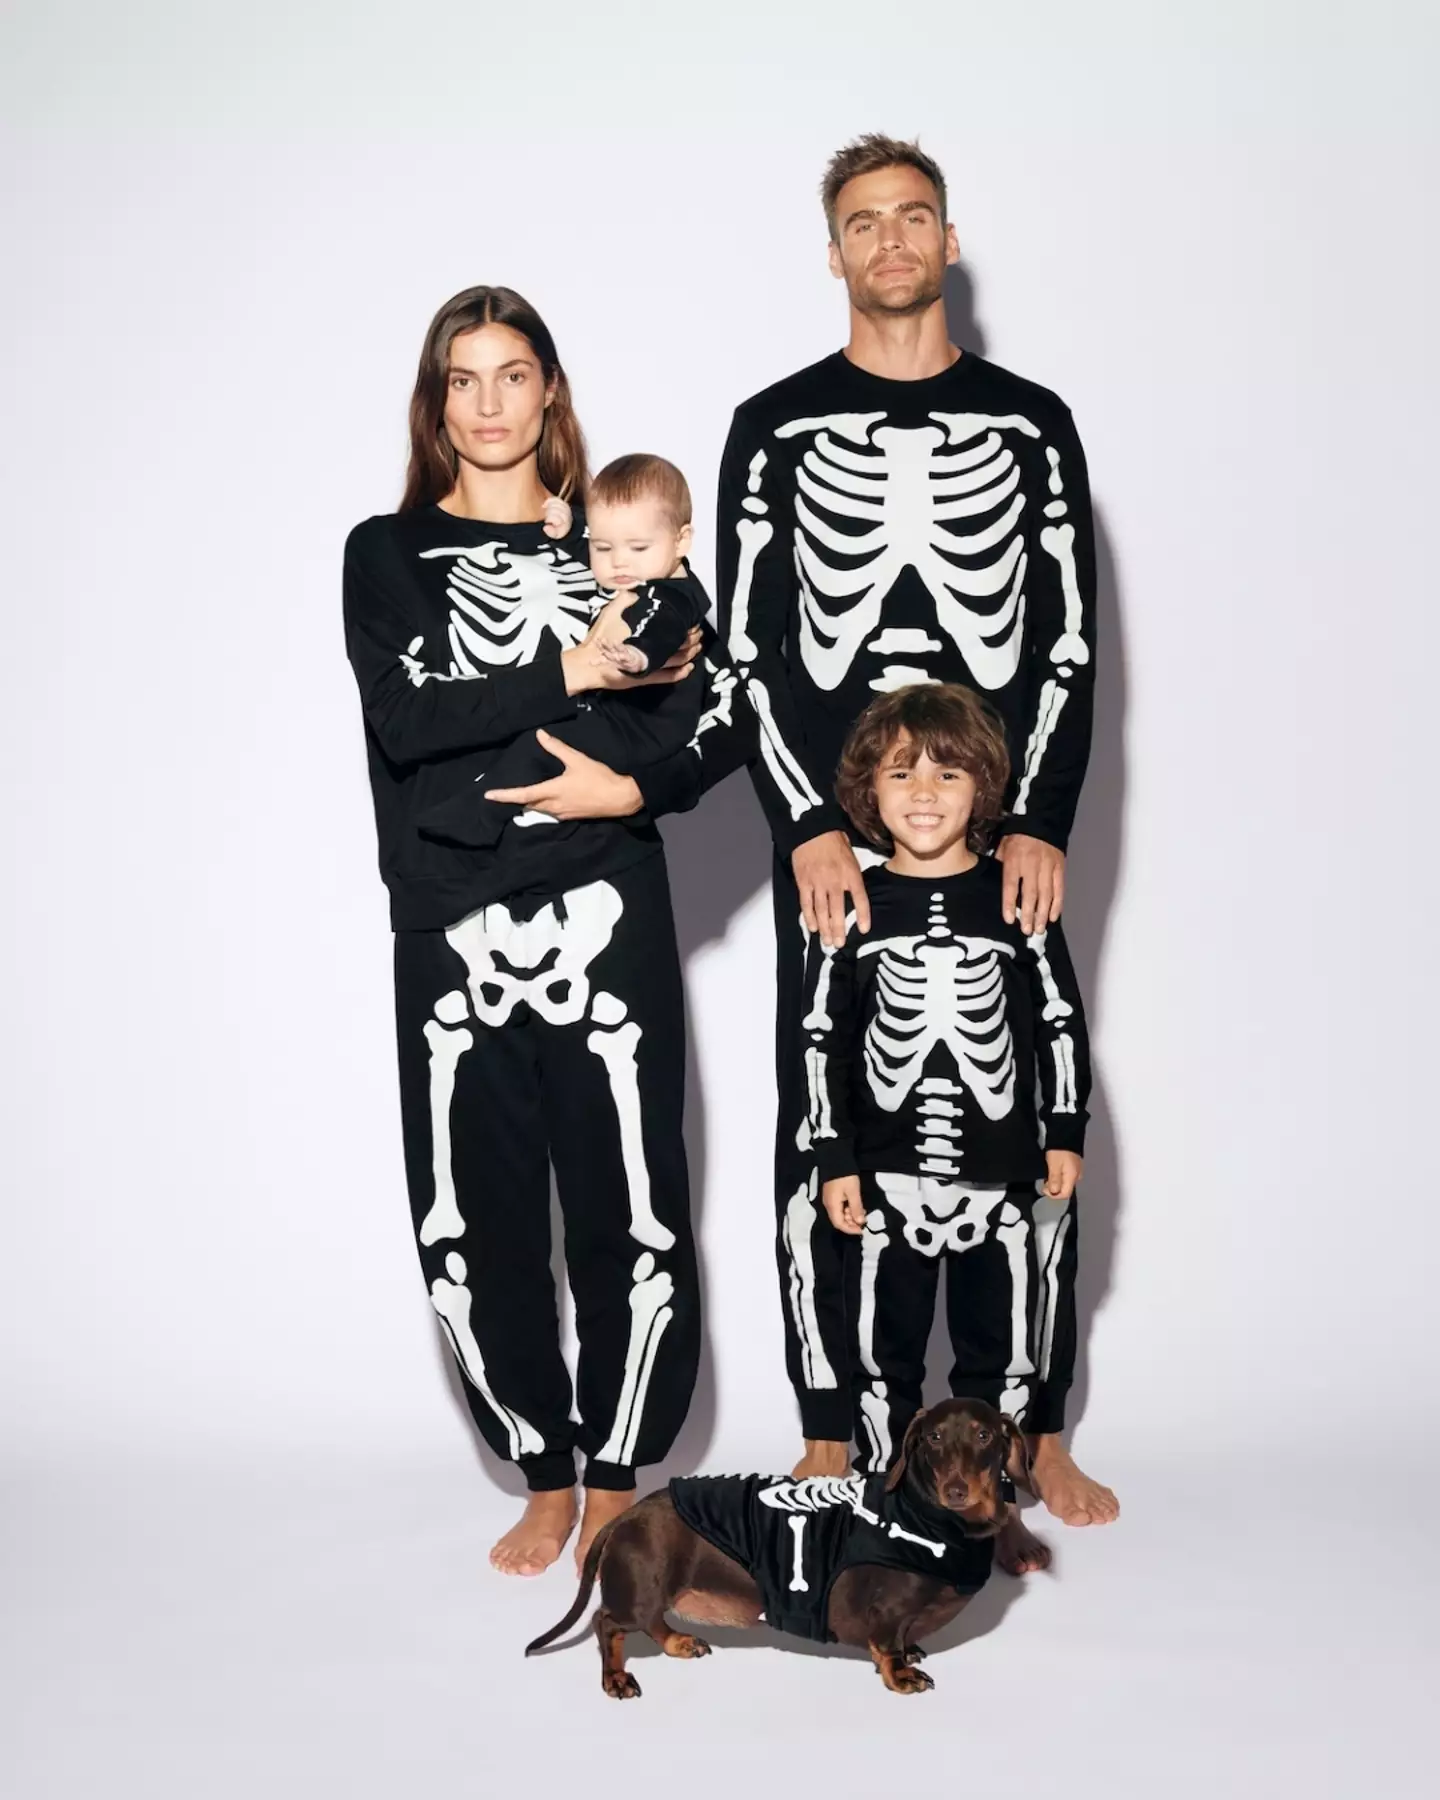 M&S has launched Halloween PJs for the whole family.